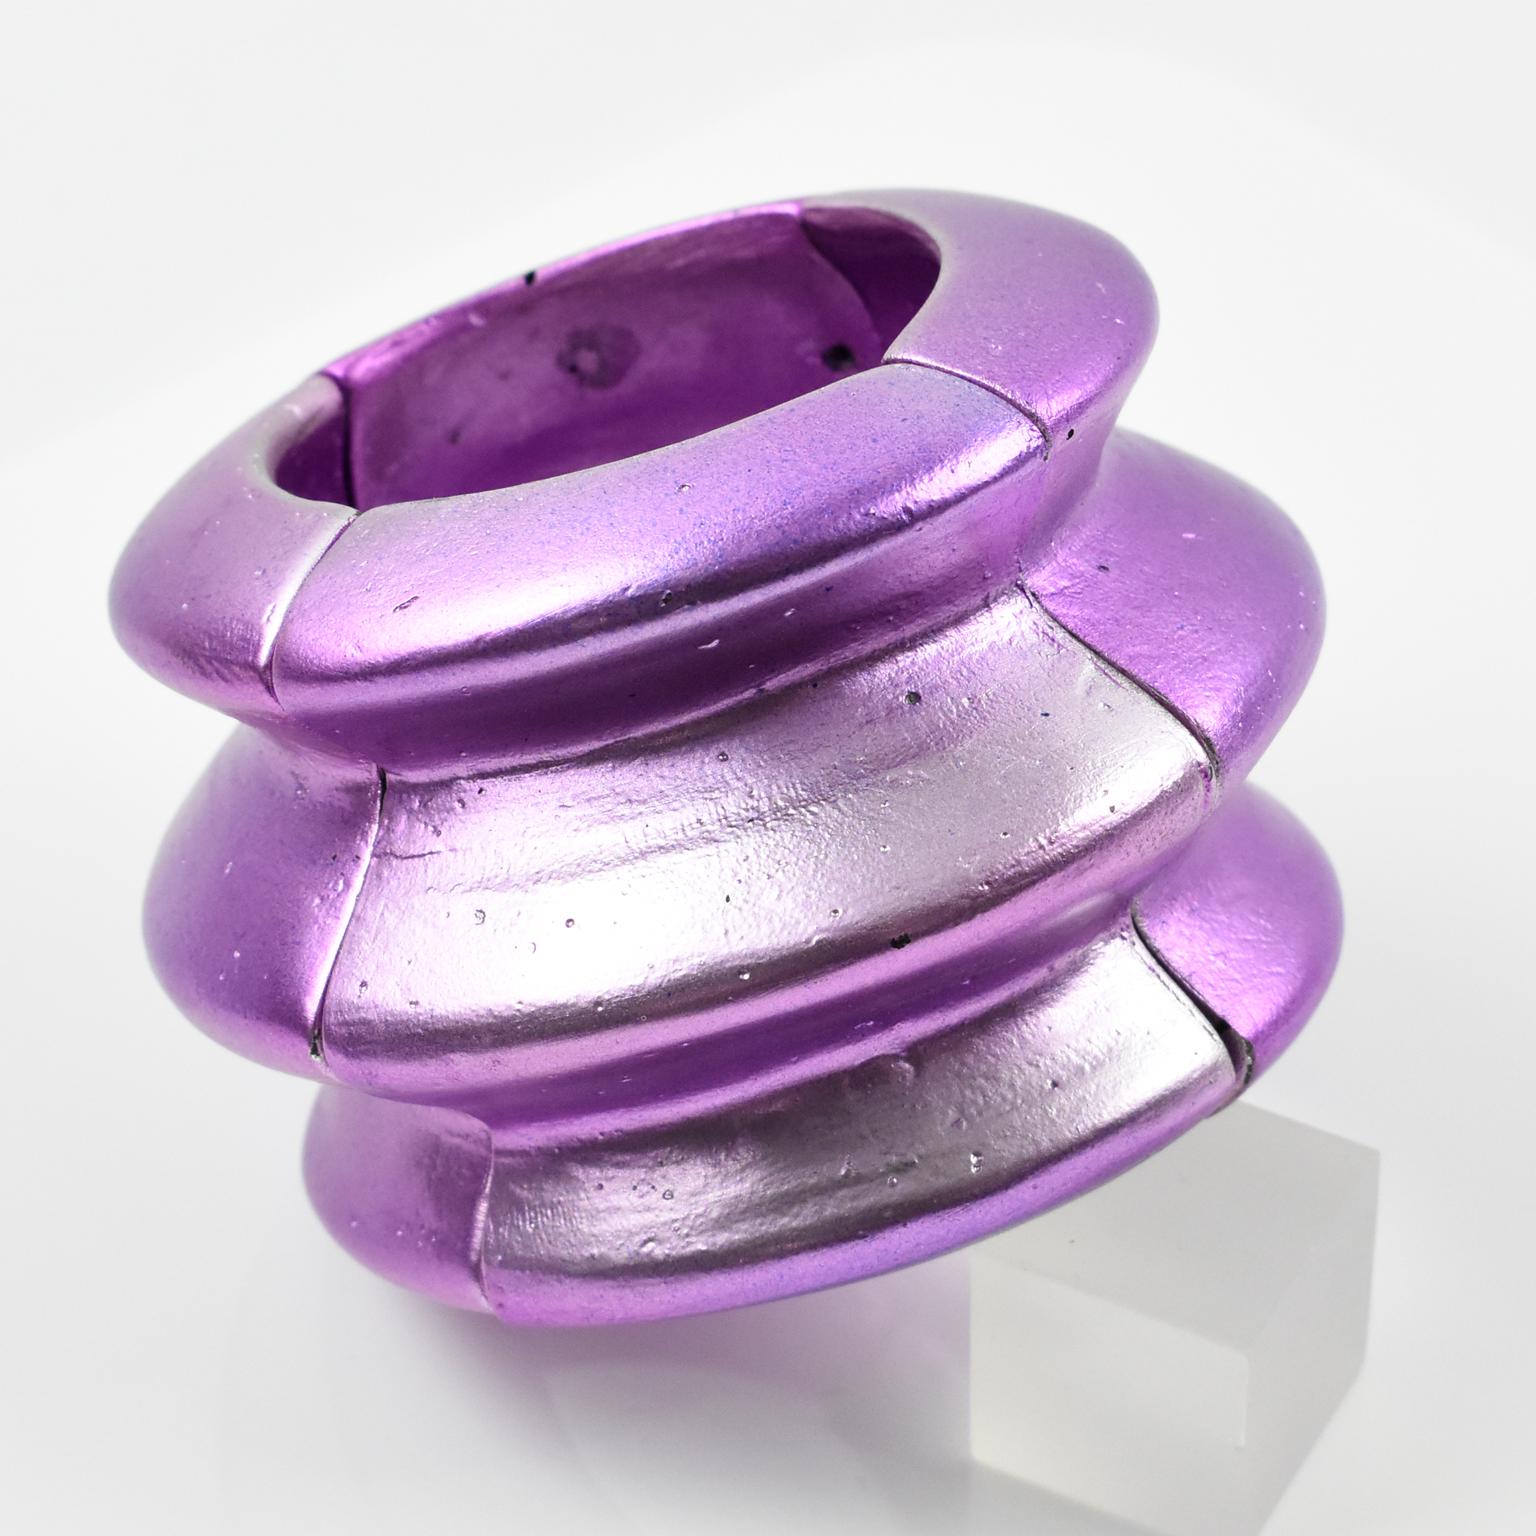 A sophisticated oversized bracelet bangle created by American artist Mary Oros. Features extra-large organic feel cast resin with an incredible purple-violet metallic coating with tone variation, built on a stretch link. This piece is not signed,